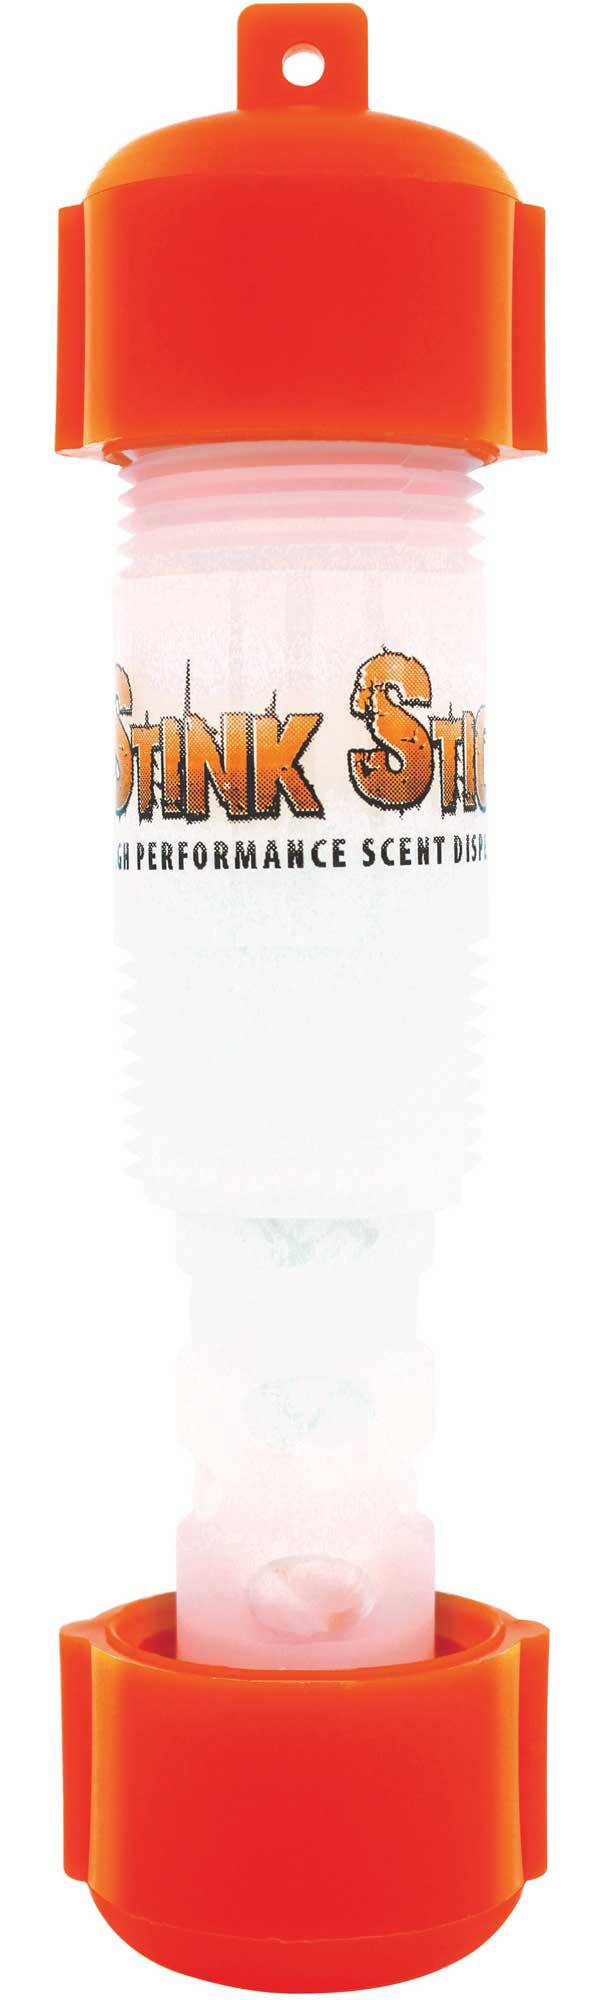 Conquest Scents Stink Stick High Performance Scent Dispenser product image